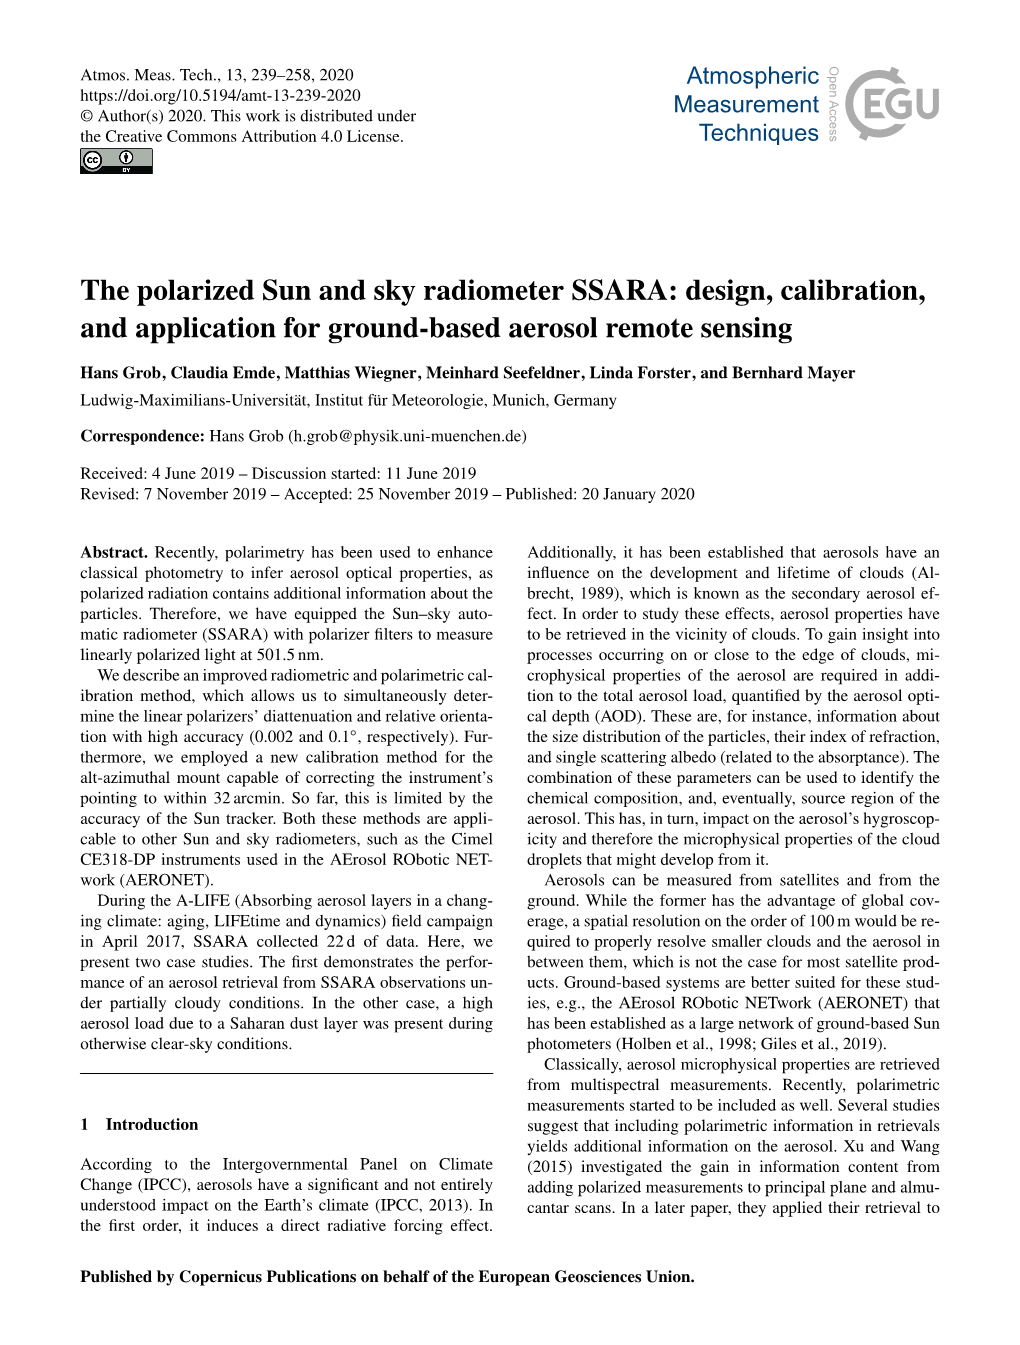 The Polarized Sun and Sky Radiometer SSARA: Design, Calibration, and Application for Ground-Based Aerosol Remote Sensing